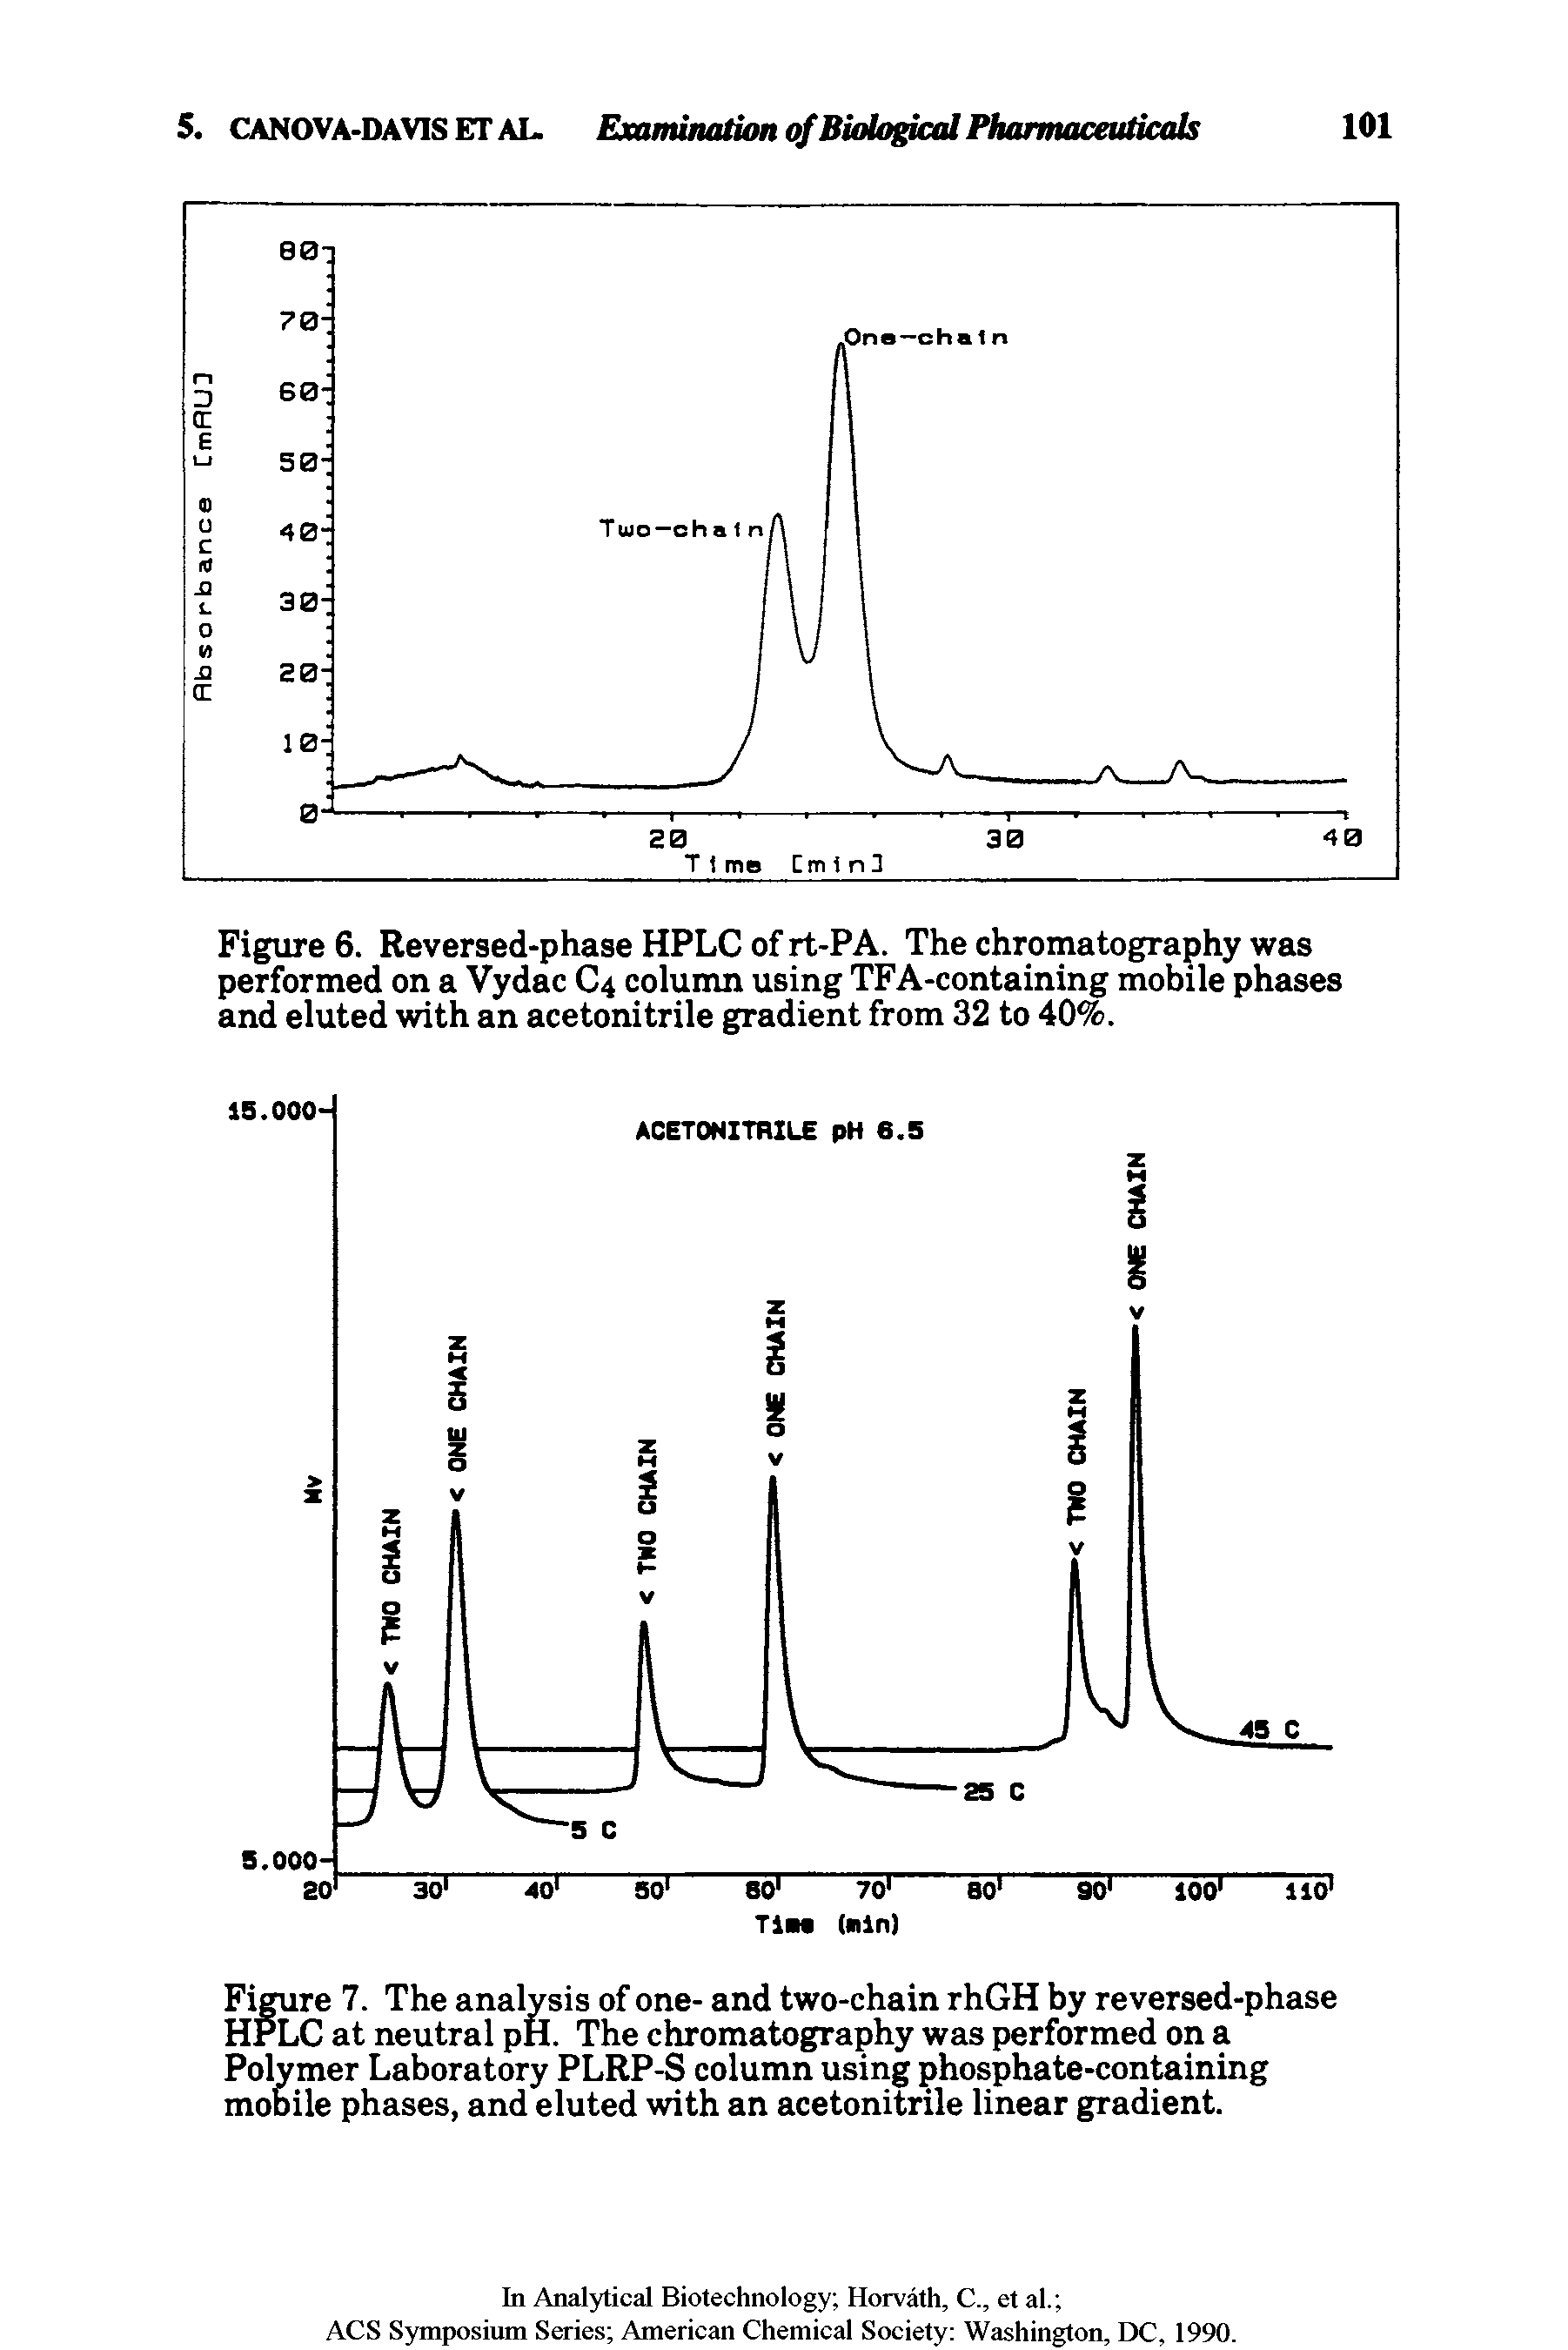 Figure 6. Reversed-phase HPLC of rt-PA. The chromatography was performed on a Vydac C4 column using TFA-containing mobile phases and eluted with an acetonitrile gradient from 32 to 40%.